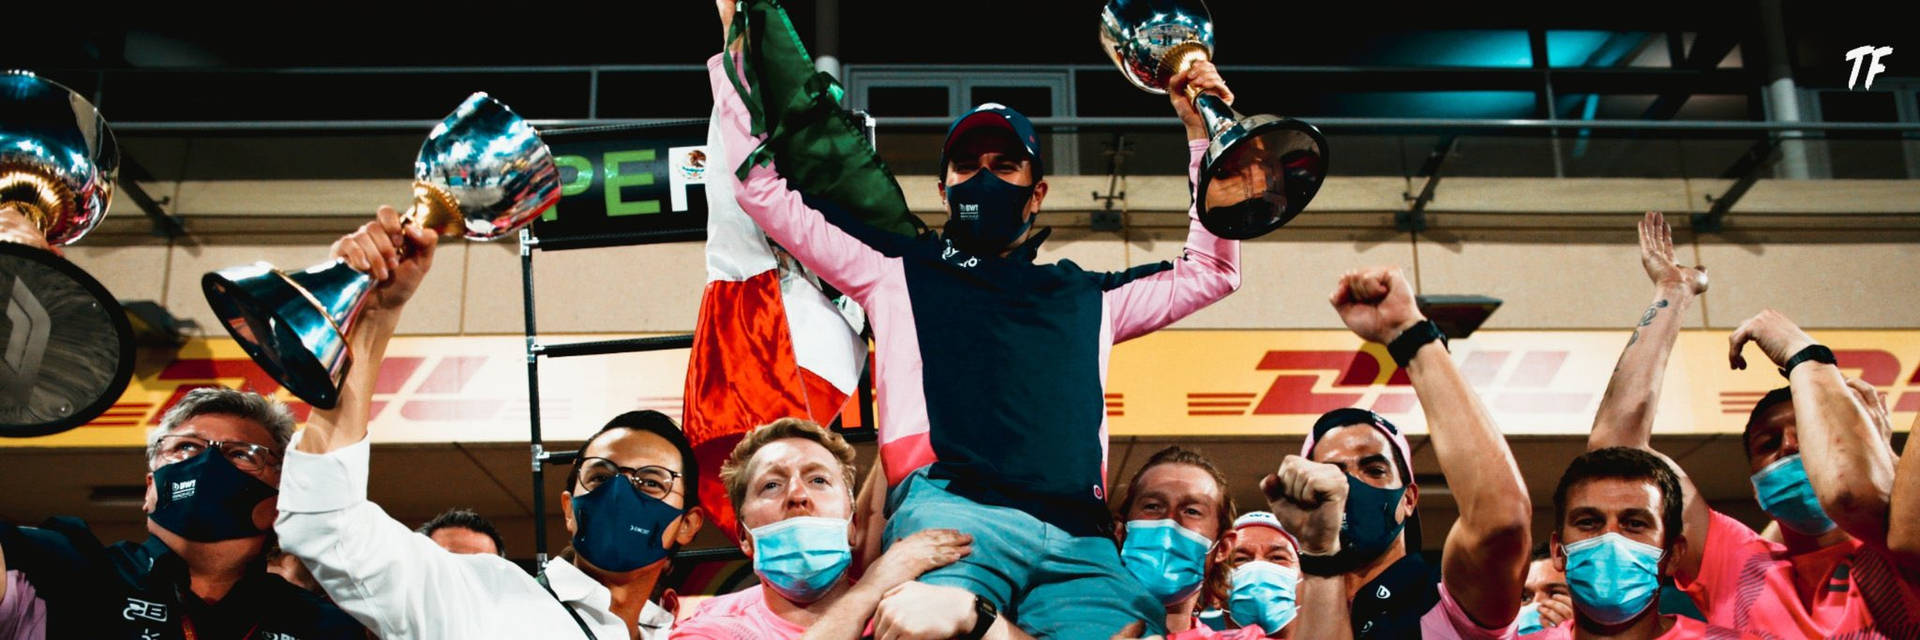 Sergio Perez victorious on teammate's shoulders Wallpaper